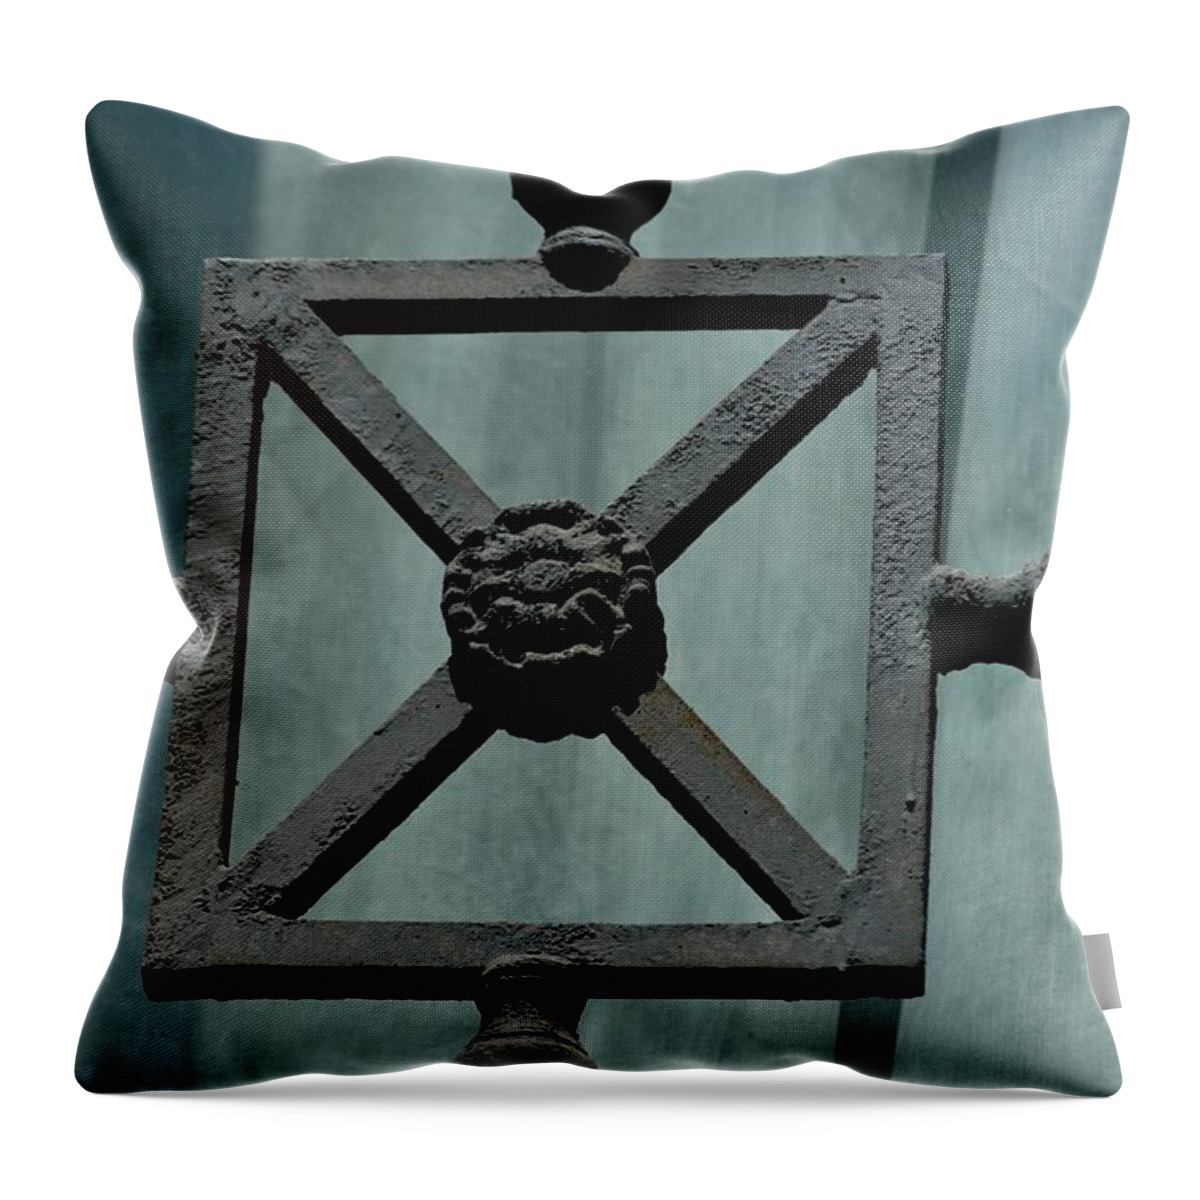 Bars Throw Pillow featuring the photograph Iron Work by Joseph Yarbrough